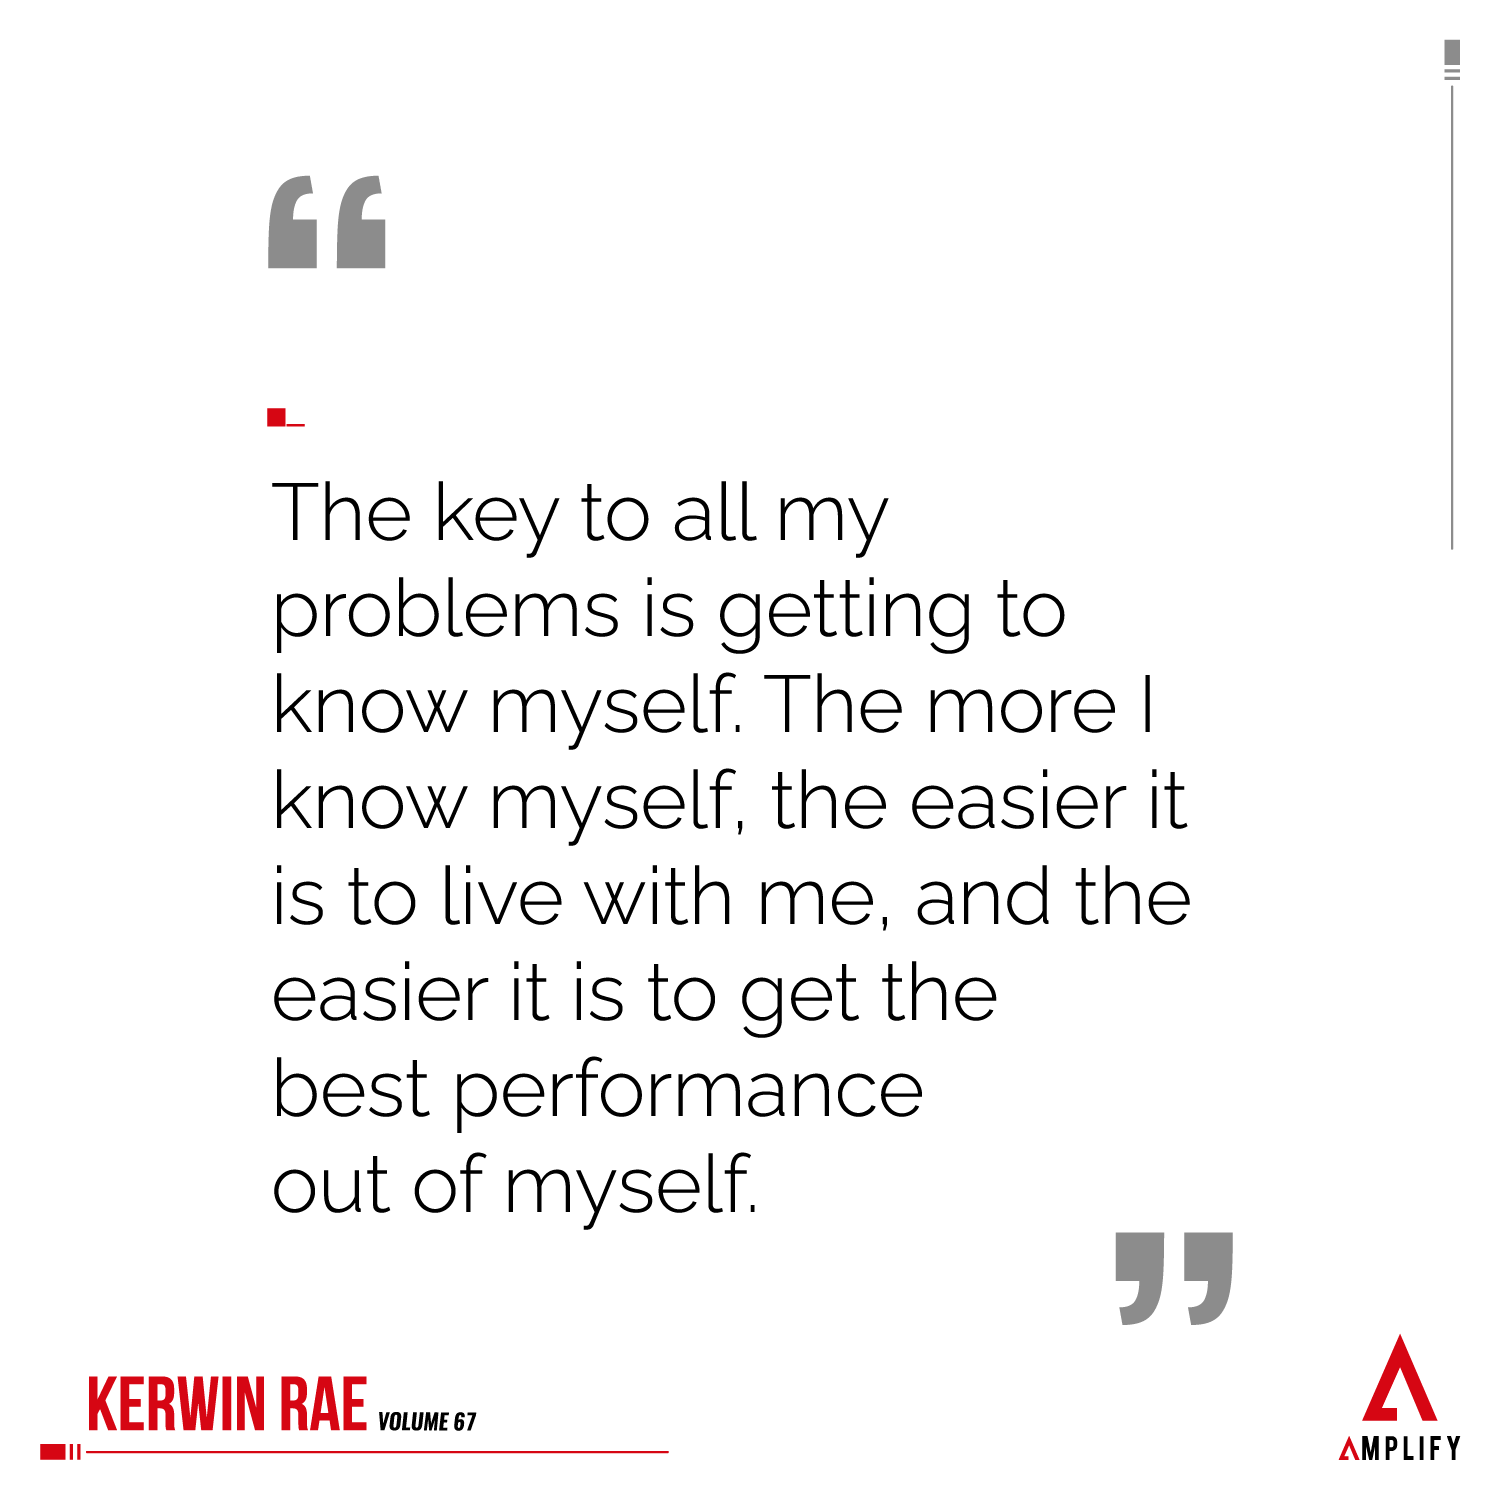 Quote: The key to all my problems is getting to know myself. The more I know myself, the easier it is to live with me, and the easier it is to get the best performance out of myself.